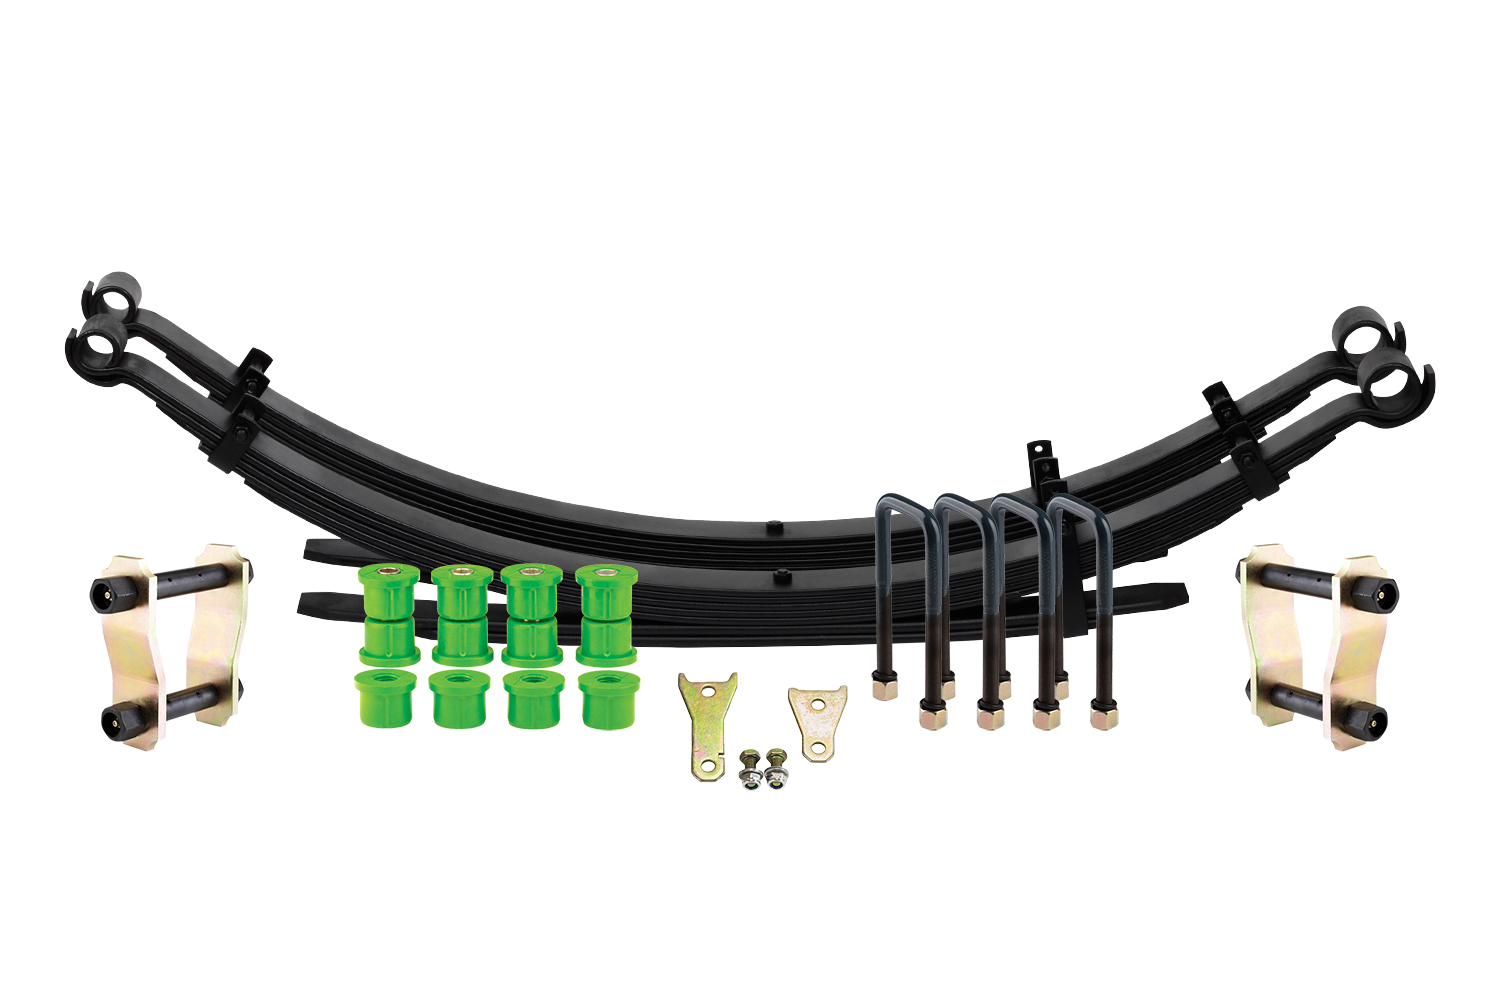 Rear Leaf Springs Kit Suited for Toyota Tundra 2007-2021 - Heavy Load (440-880LBS)